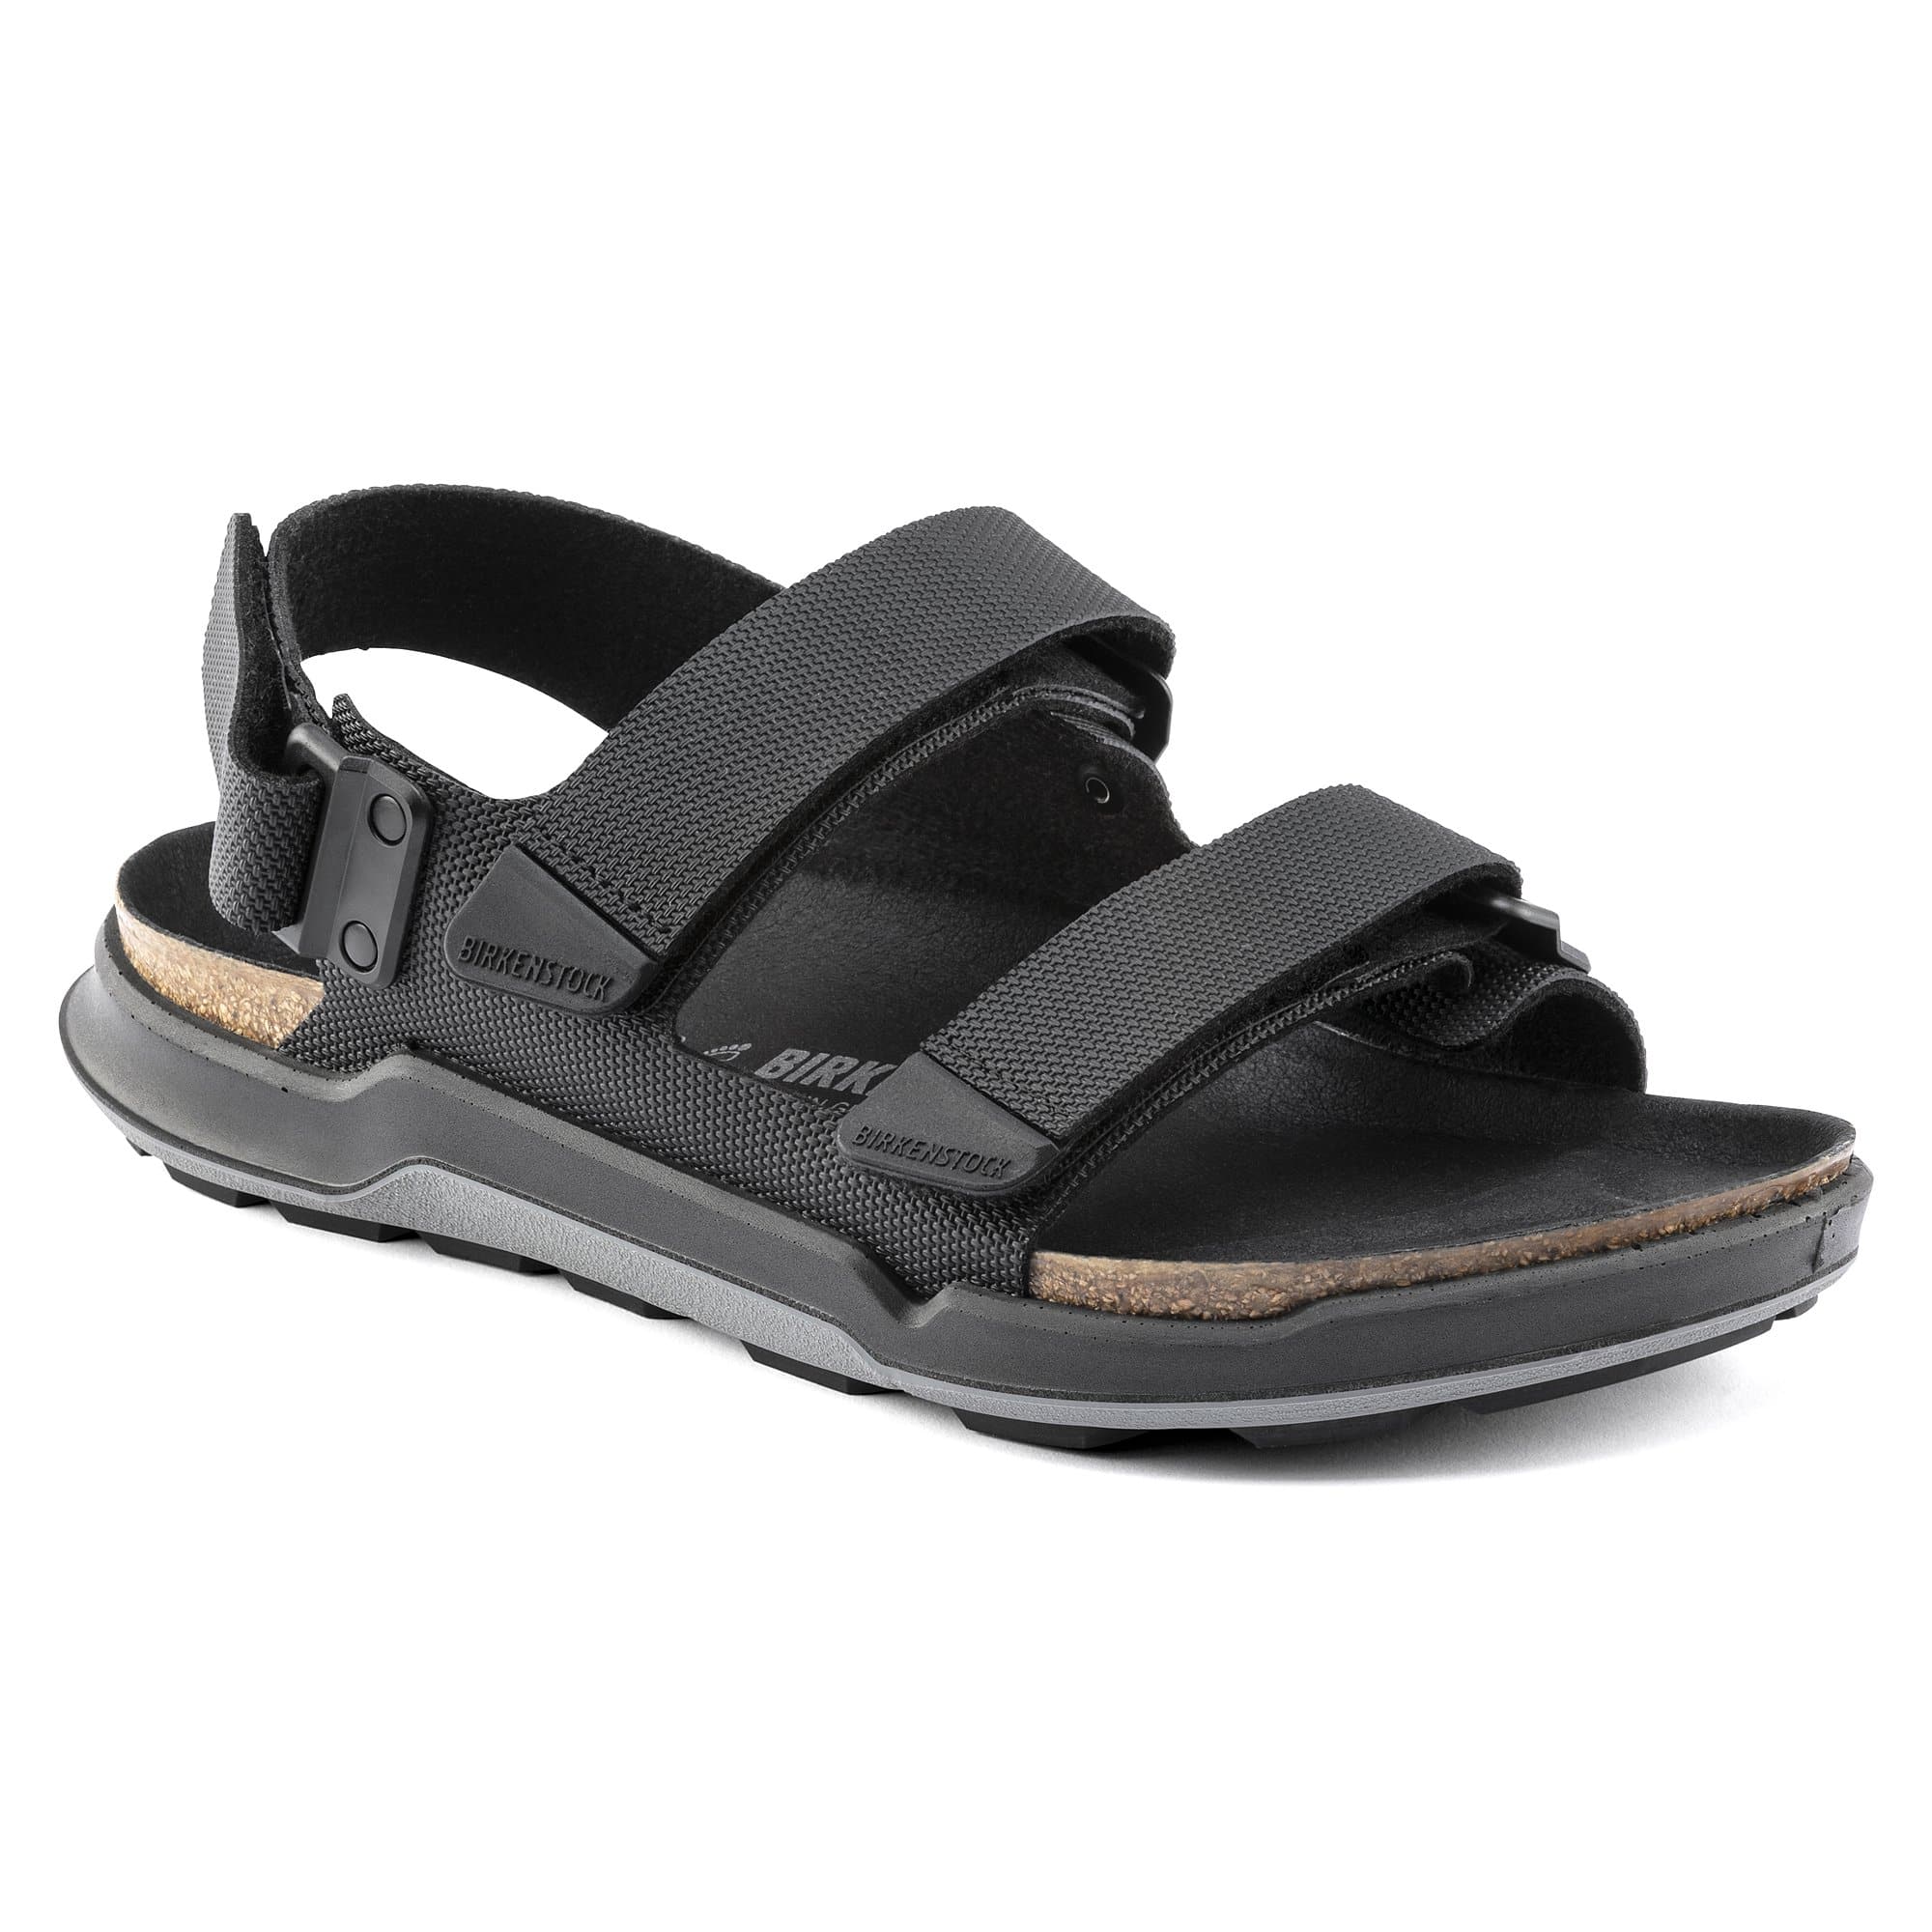 Shop these Stylish Birkenstock Sandals for Spring From QVC | Us Weekly